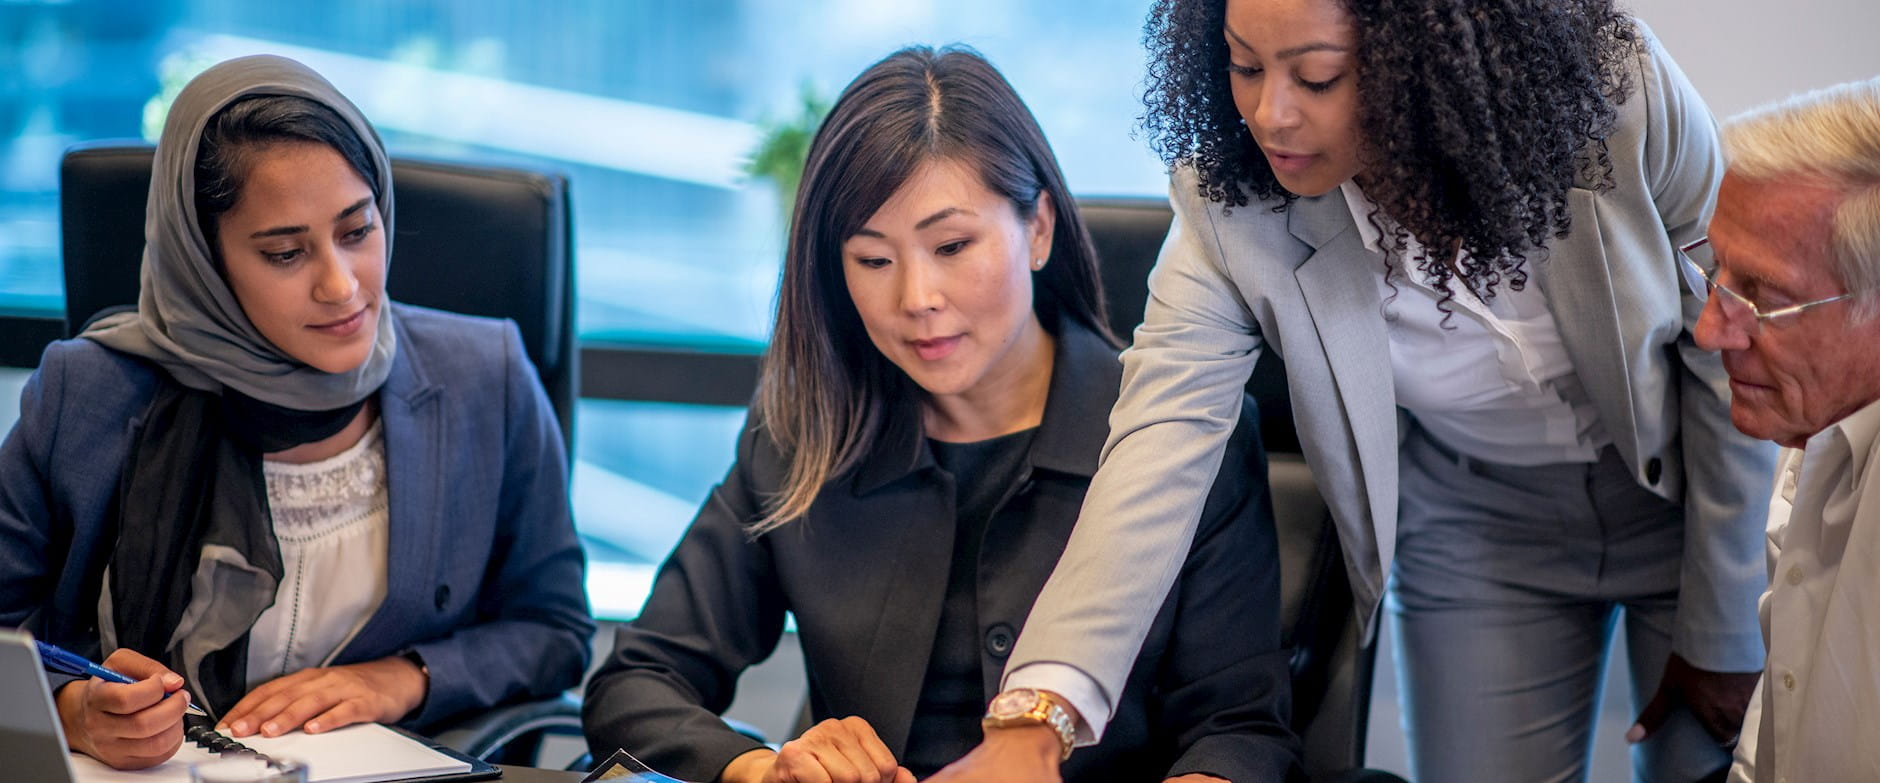 Women in business suits engaged around a document on the table